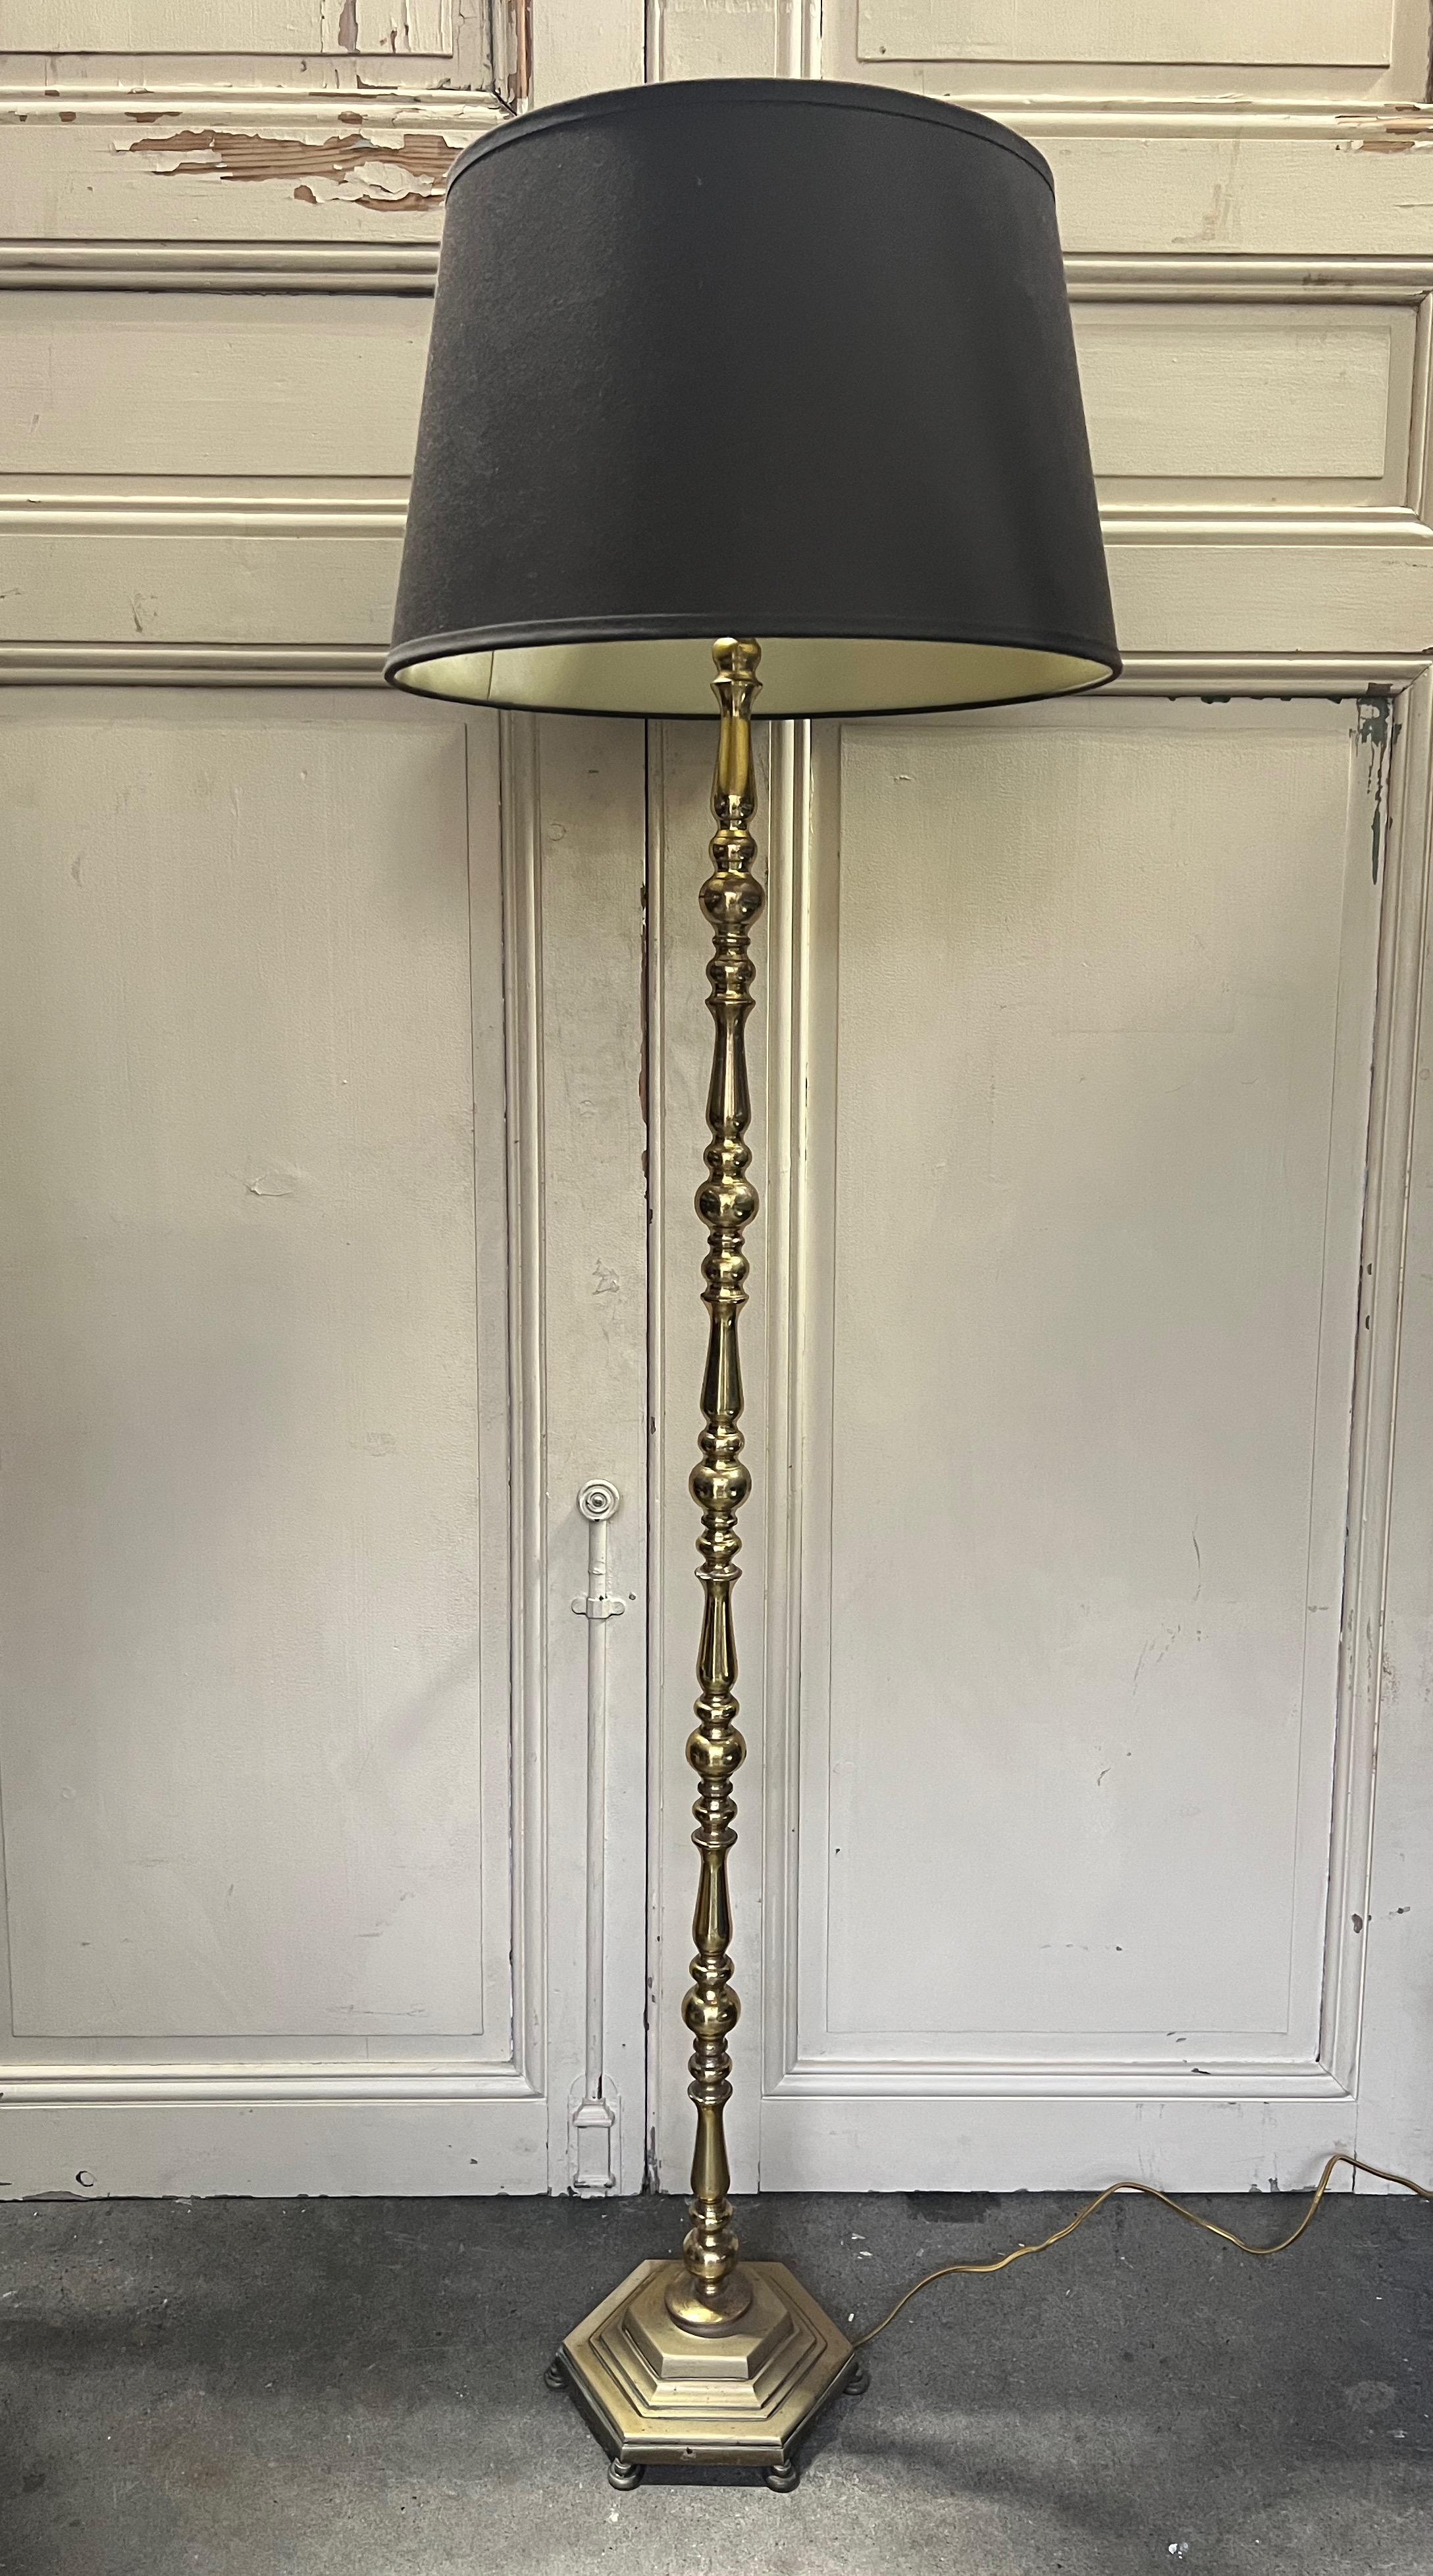 Introducing a stunning French 1940's floor lamp, expertly fashioned from high-quality brass and bronze. This captivating piece showcases a cast hexagonal base and meticulously turned components. The entire lamp has been meticulously hand-polished,